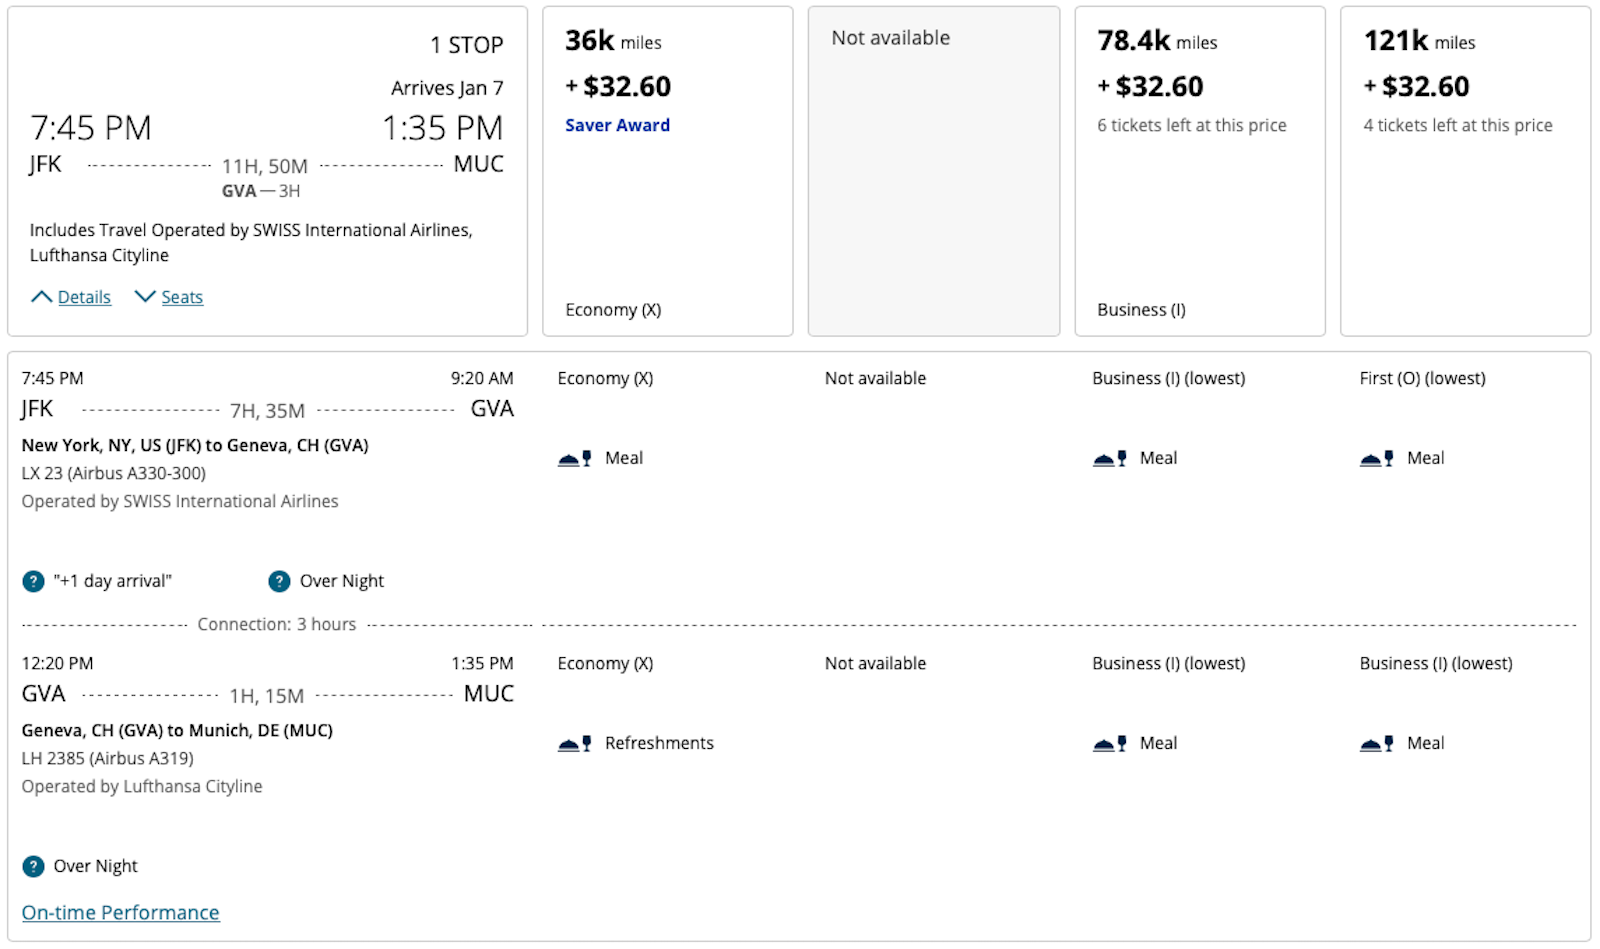 award pricing for using United miles